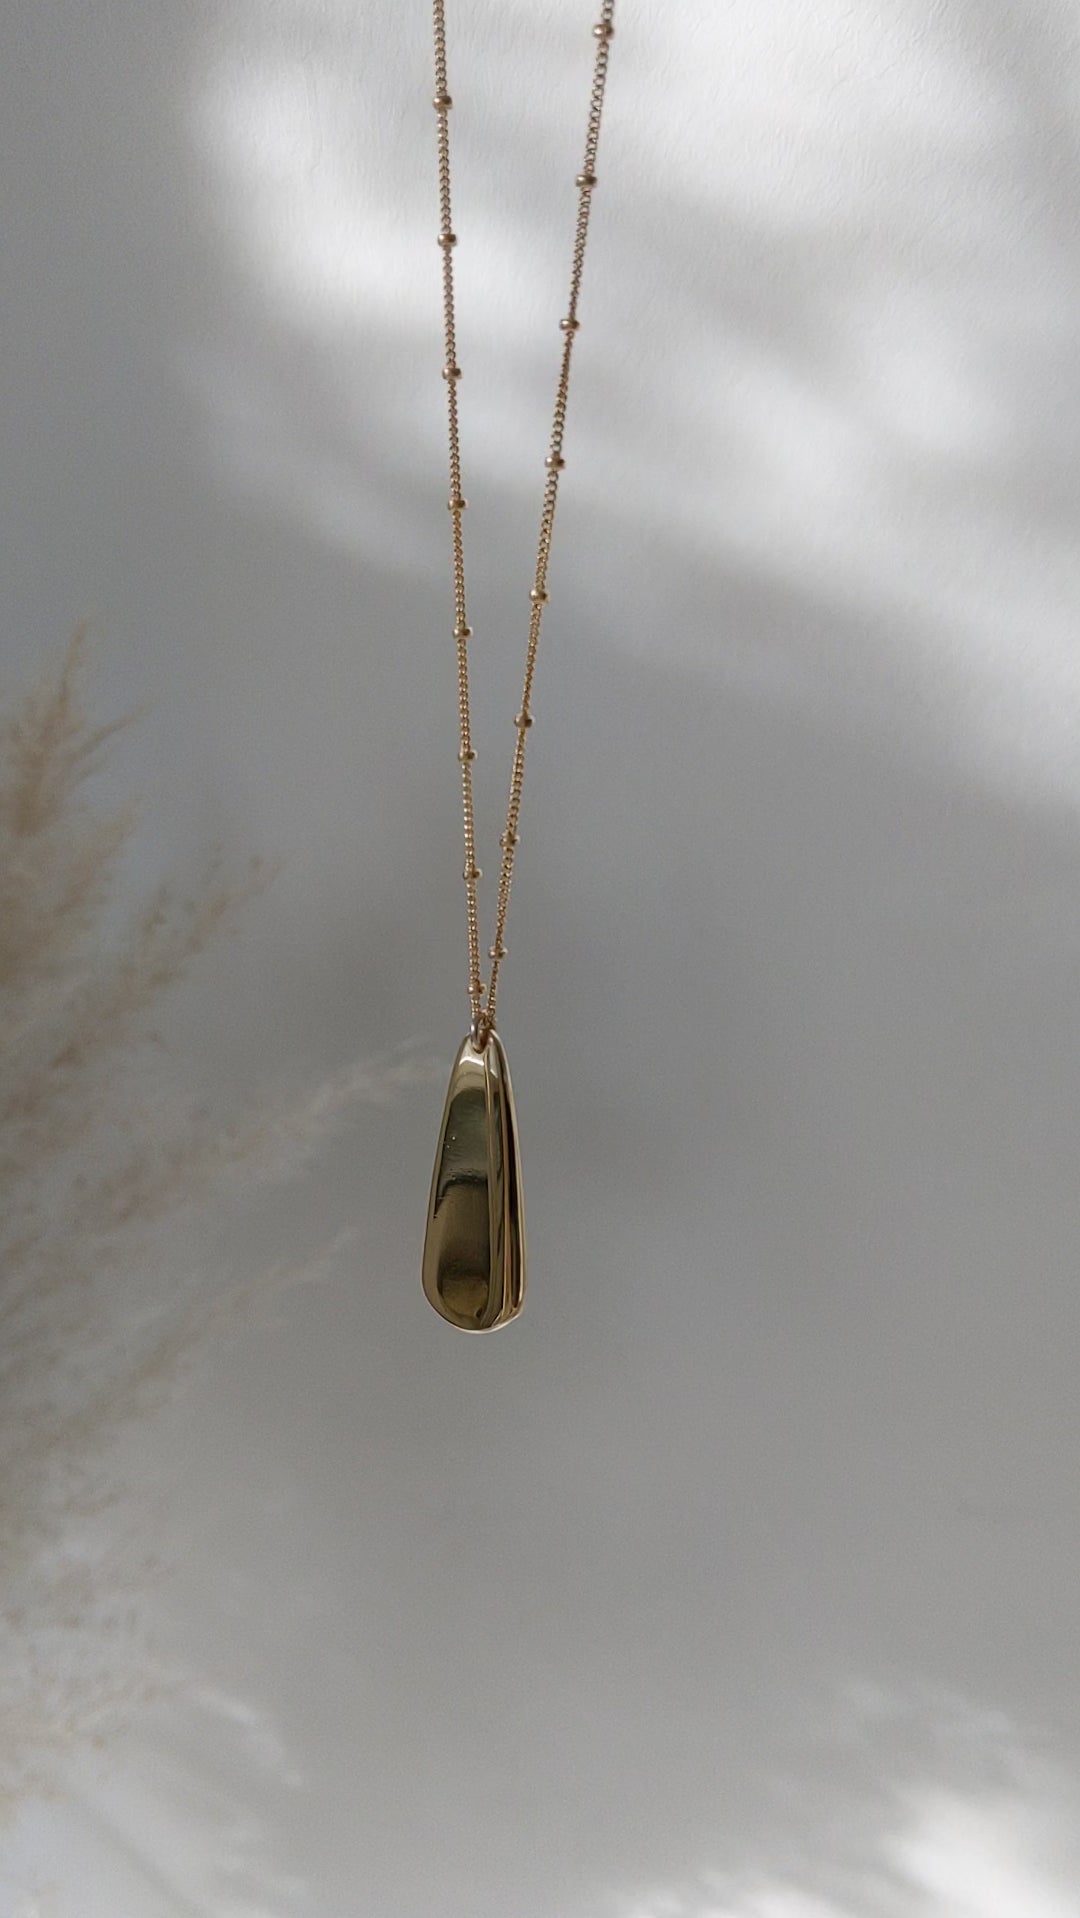 The Elegant Valerie necklace by Megan Collins Jewellery available in Gold vermeil and 100% recycled silver